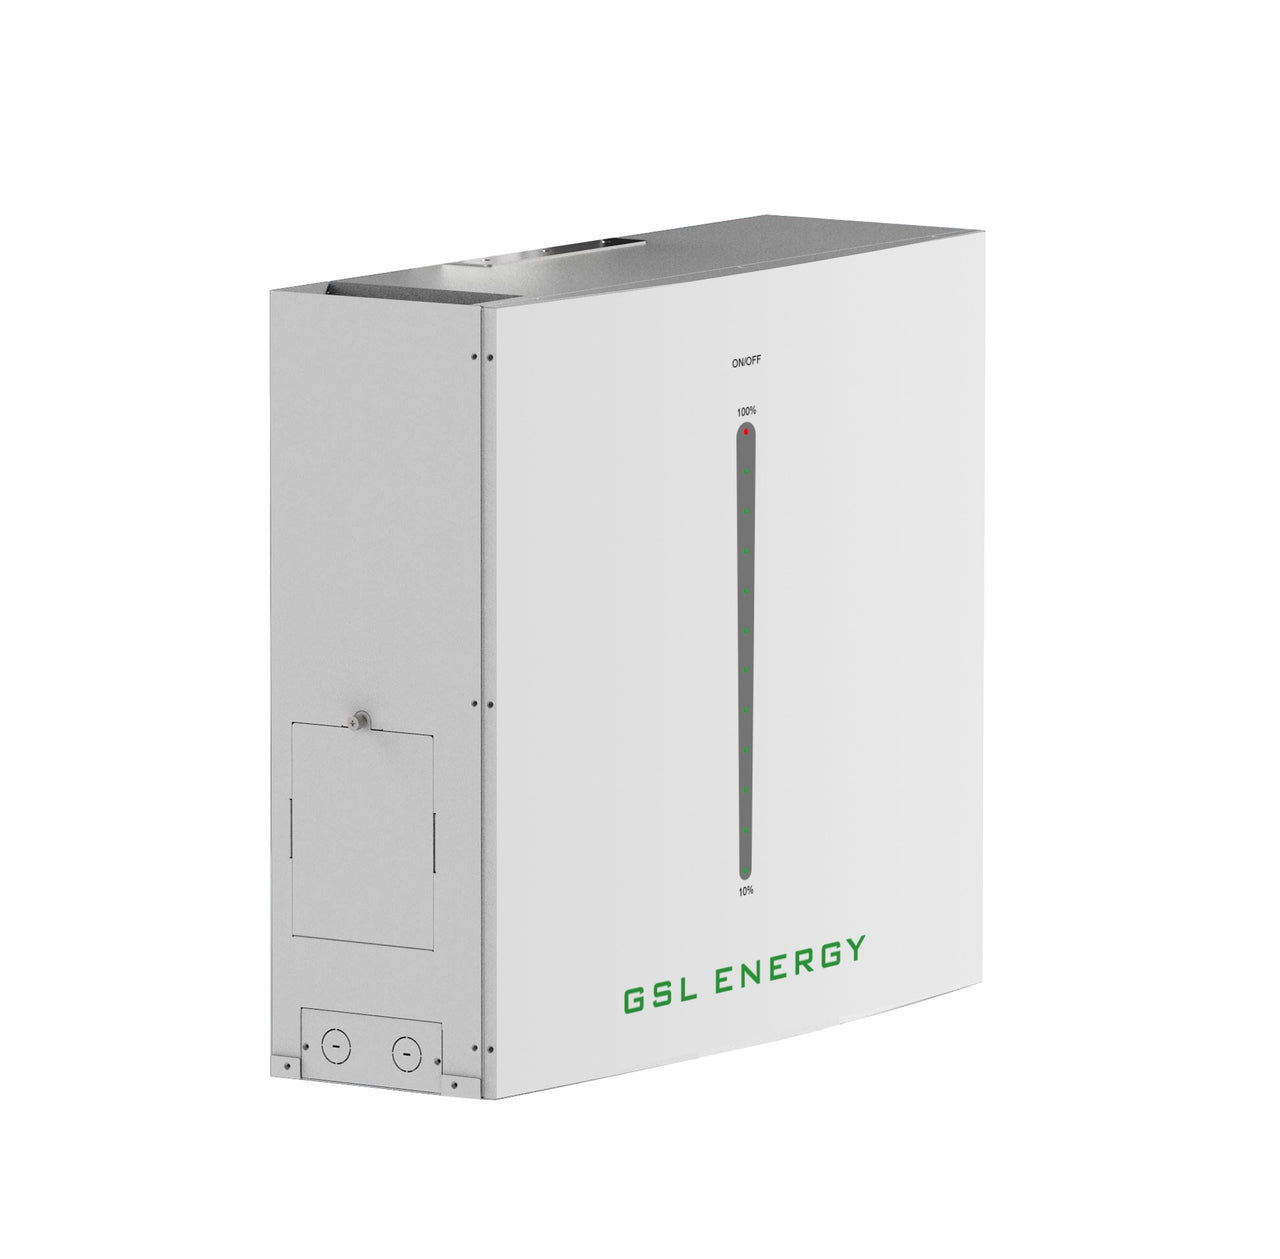 2 X GSL 10.24kwh battery (20.48kwh) Compatible with GSL, Sunsynk, Victron & Voltronic £4,910 +VAT